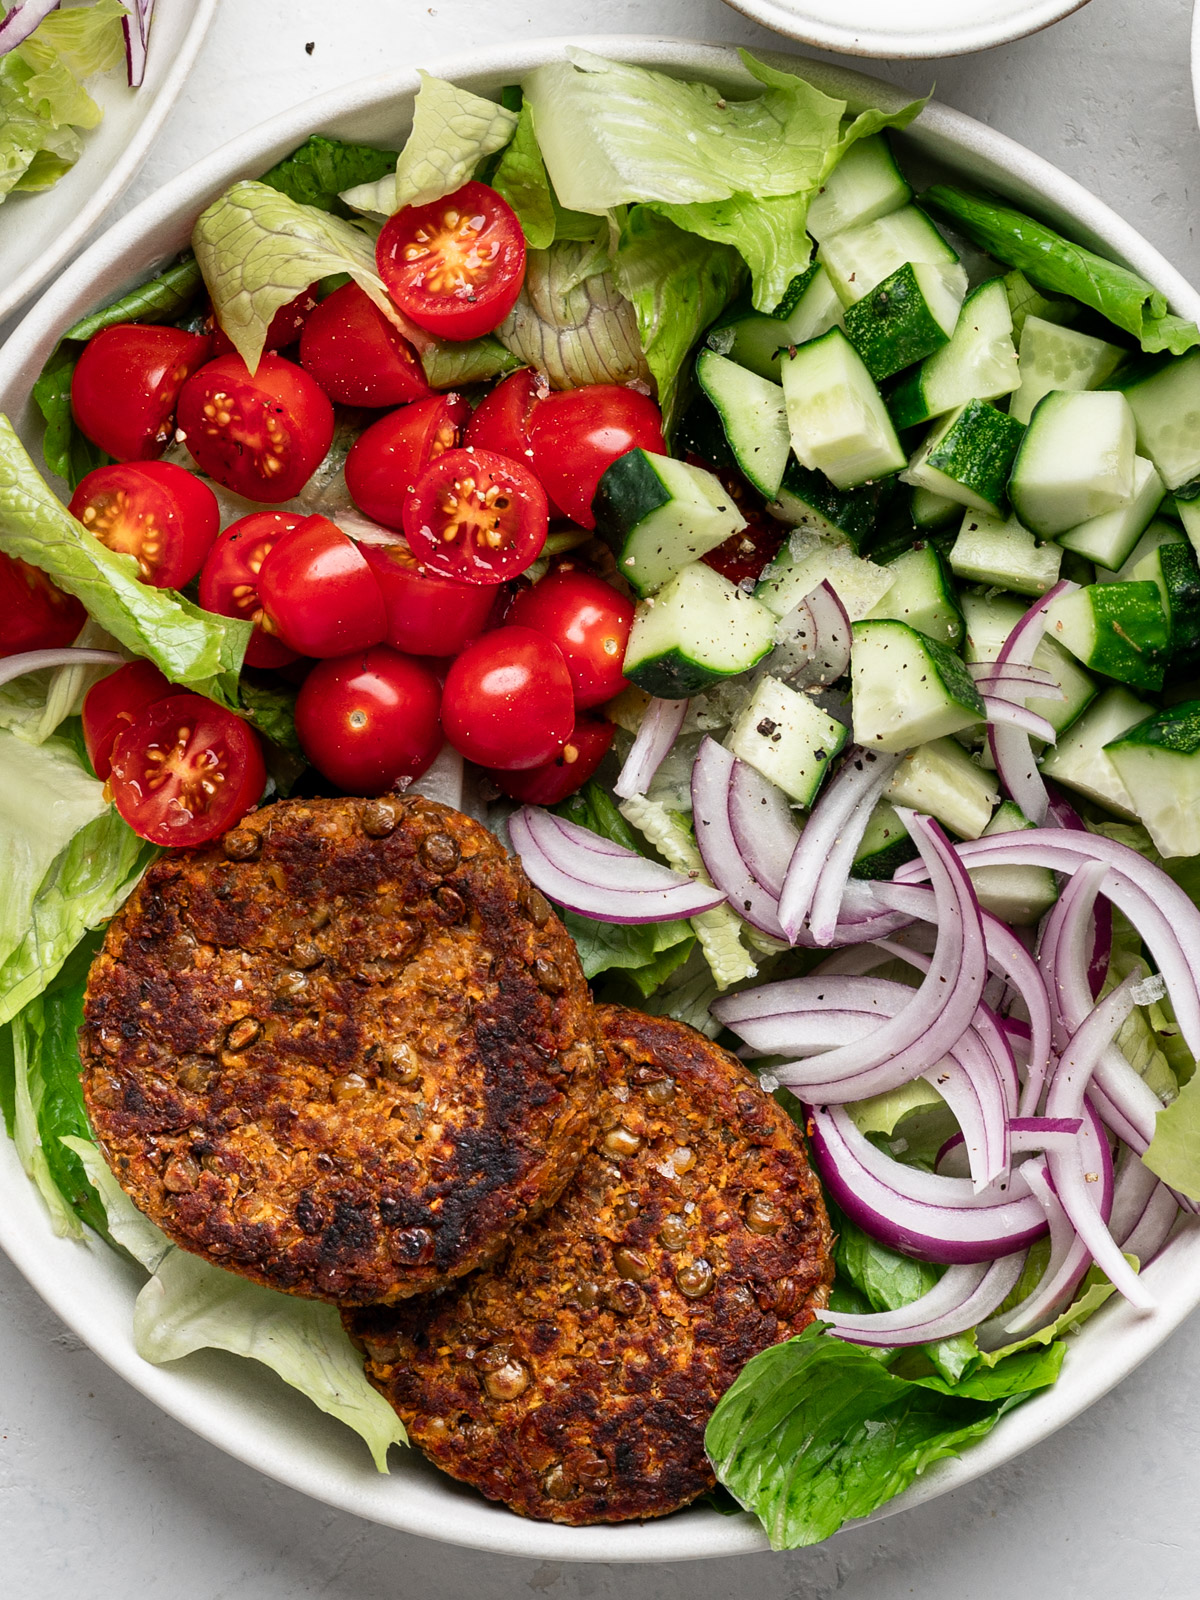 lentil patties served on a plate with salad greens with tomatoes, onions and cucumbers